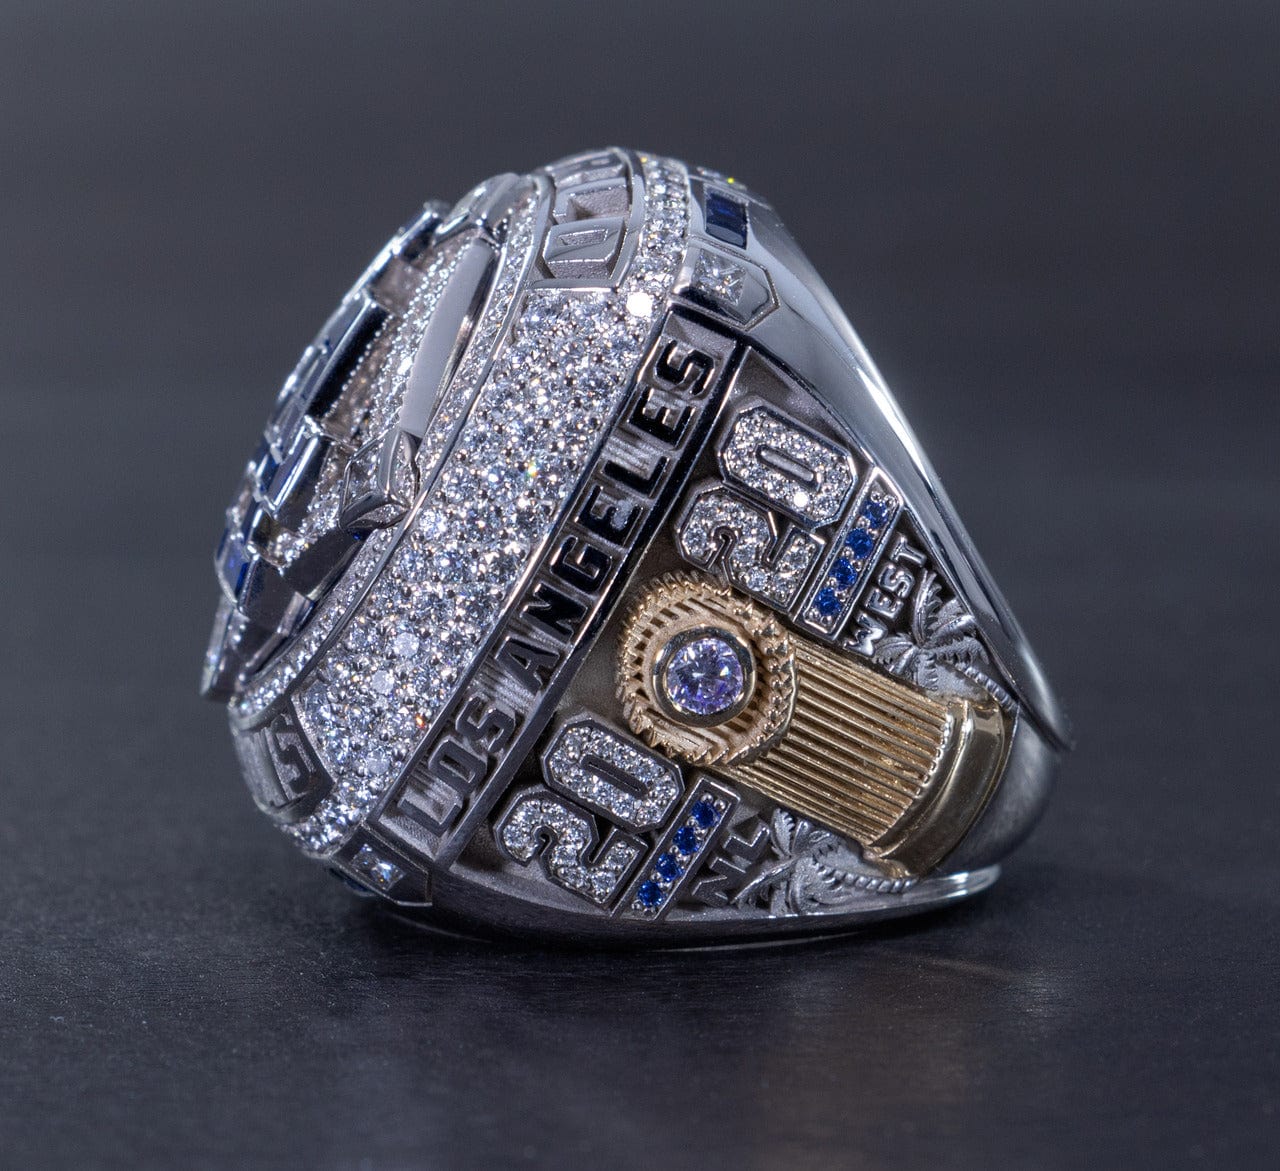 2020 Dodgers Championship Ring Year